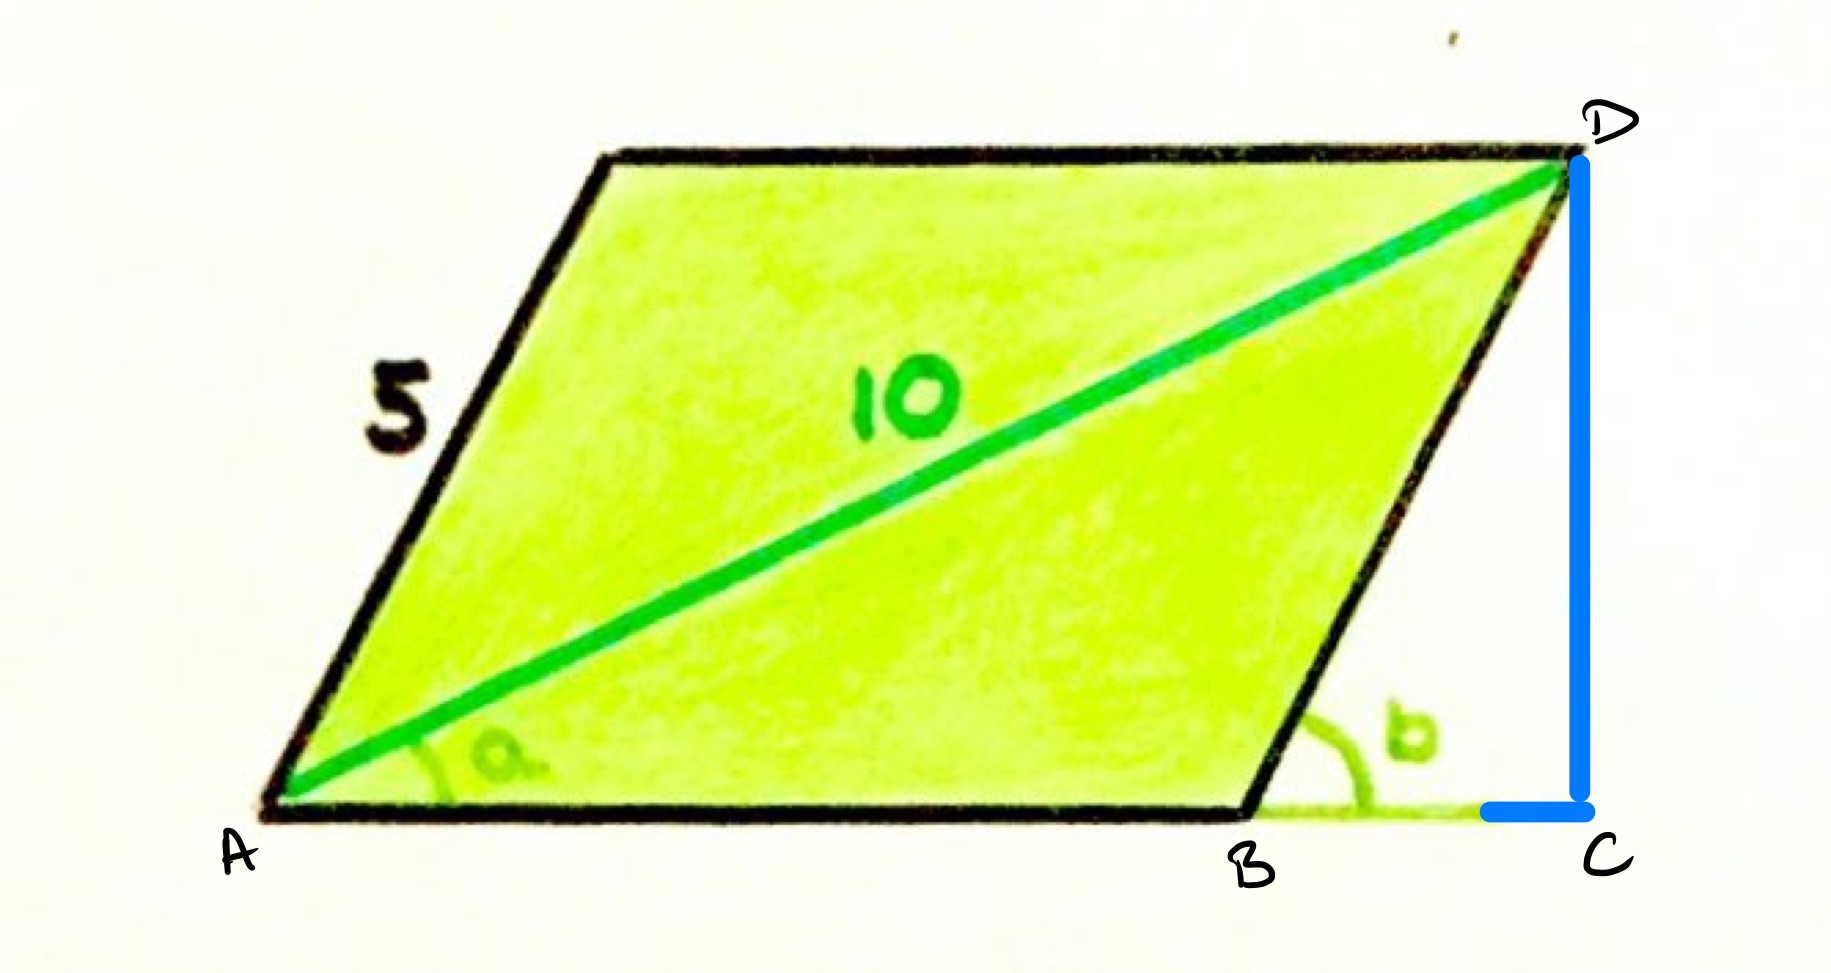 Parallelogram area labelled